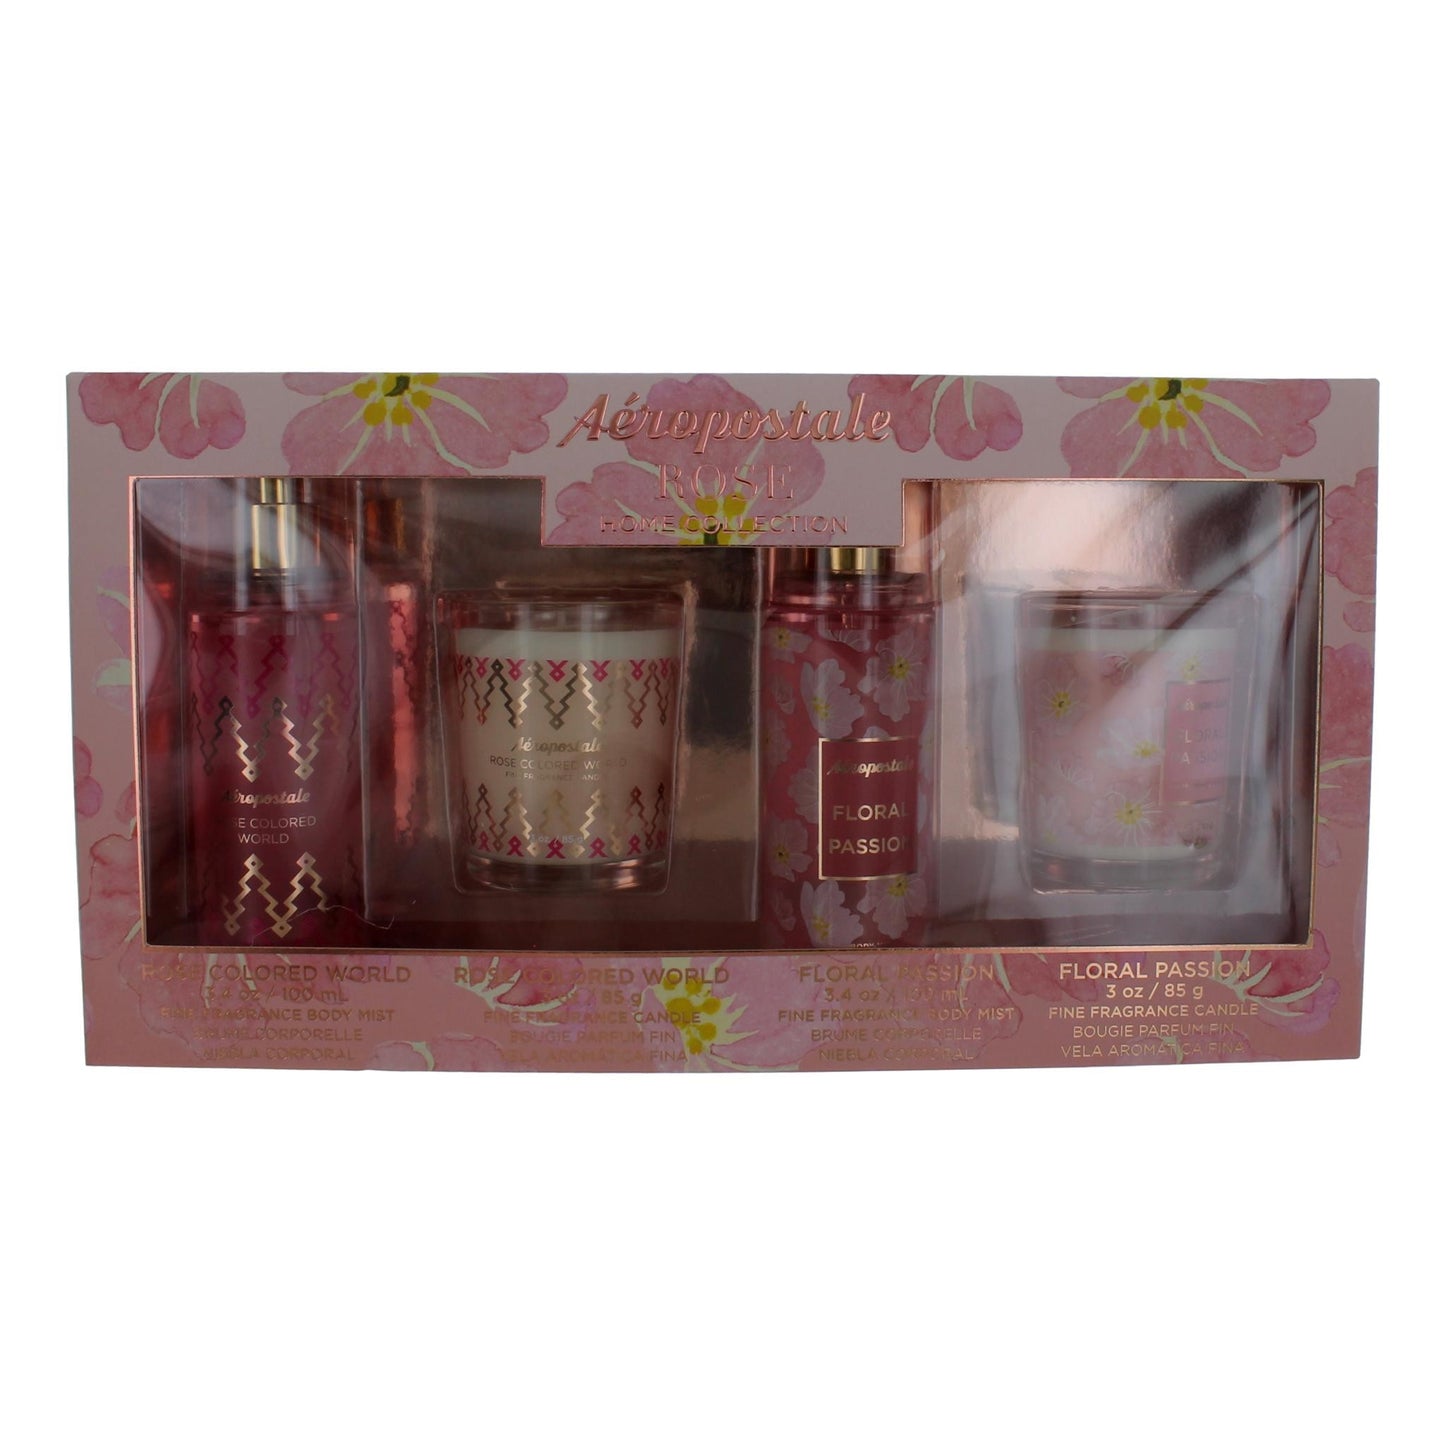 Bottle of Aeropostale Rose Home Collection by Aeropostale, 4 Piece Gift Set